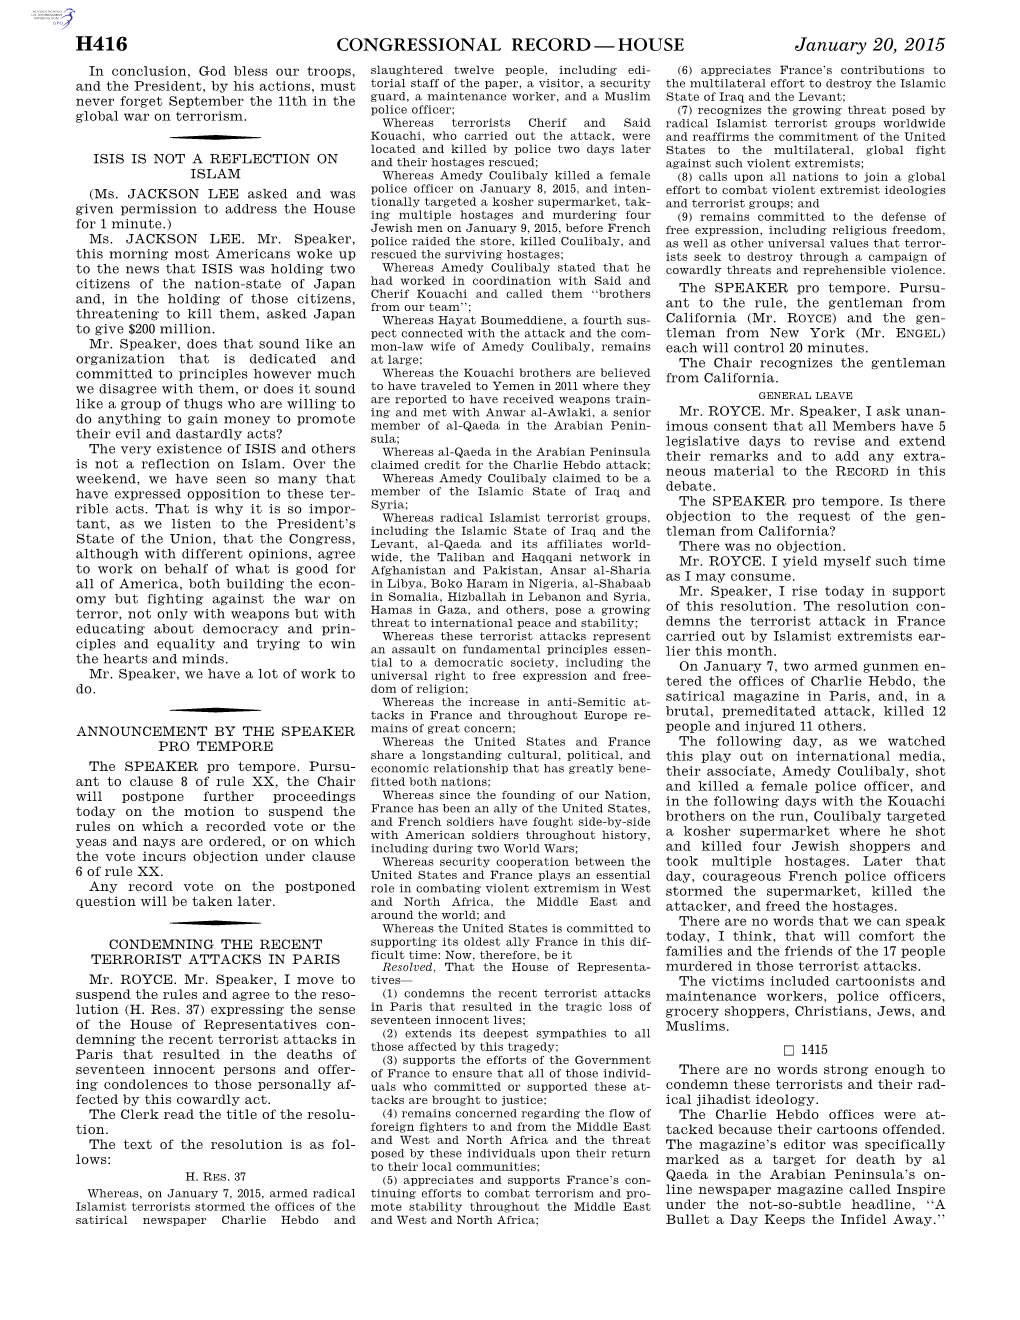 Congressional Record—House H416